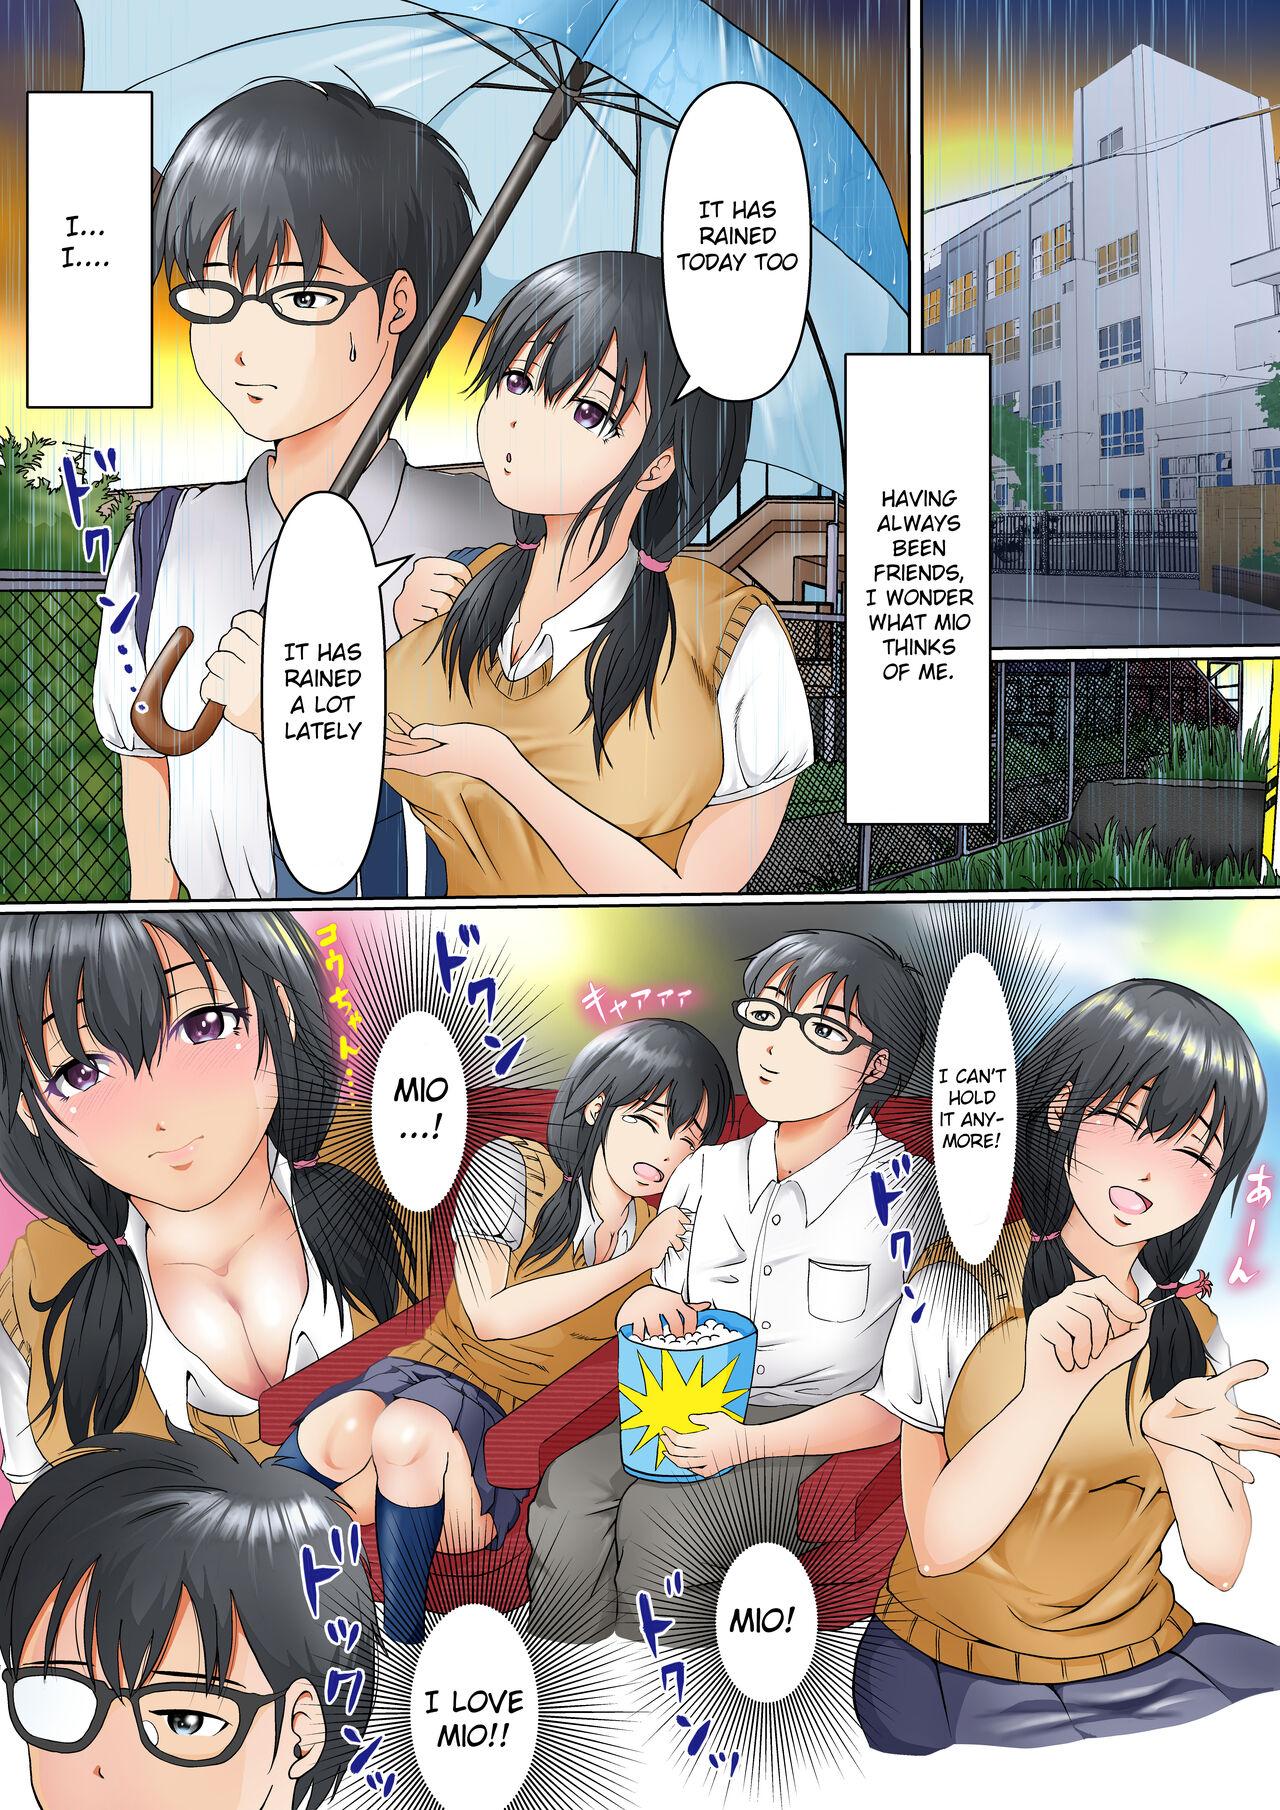 Nude The reason why the bond with my childhood friend is broken so easily - Original Cutie - Page 11